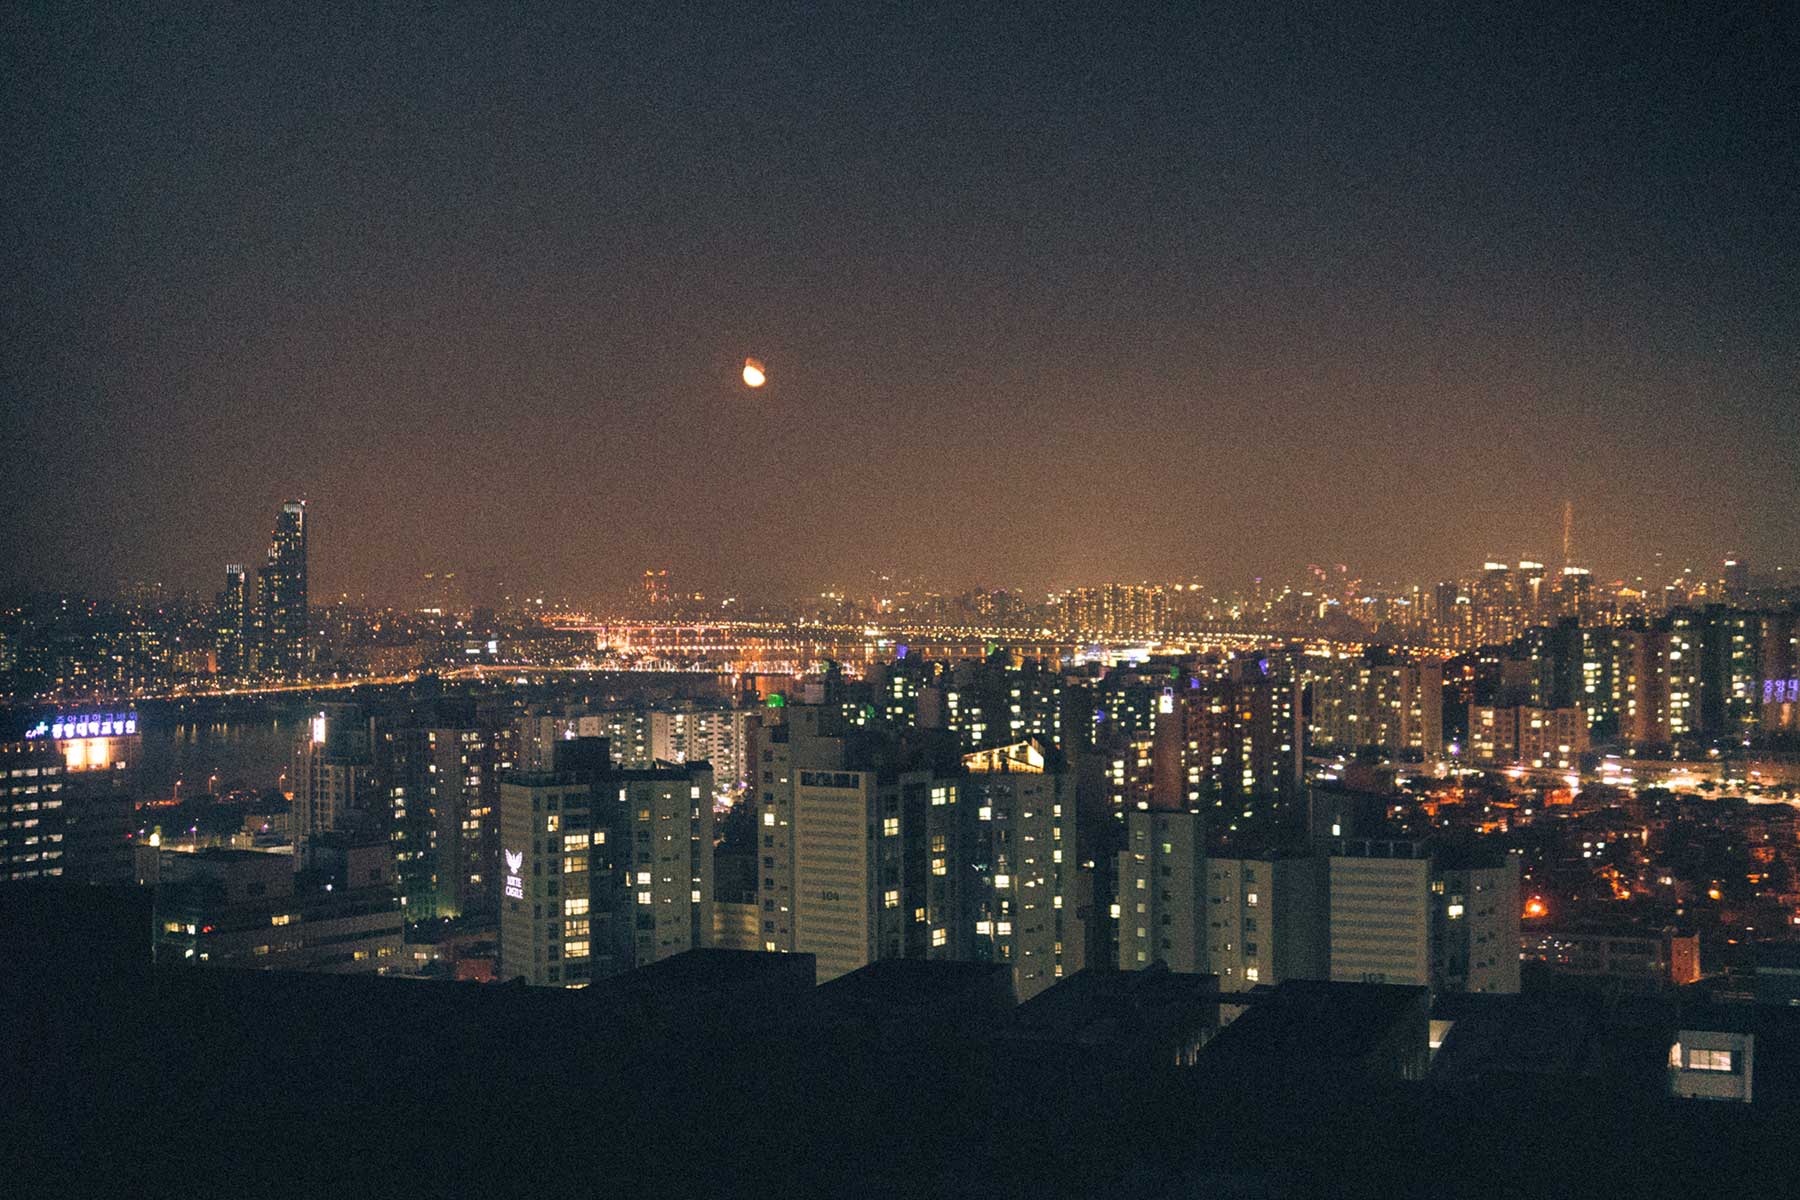 Landscape picture of Seoul, Korea by night